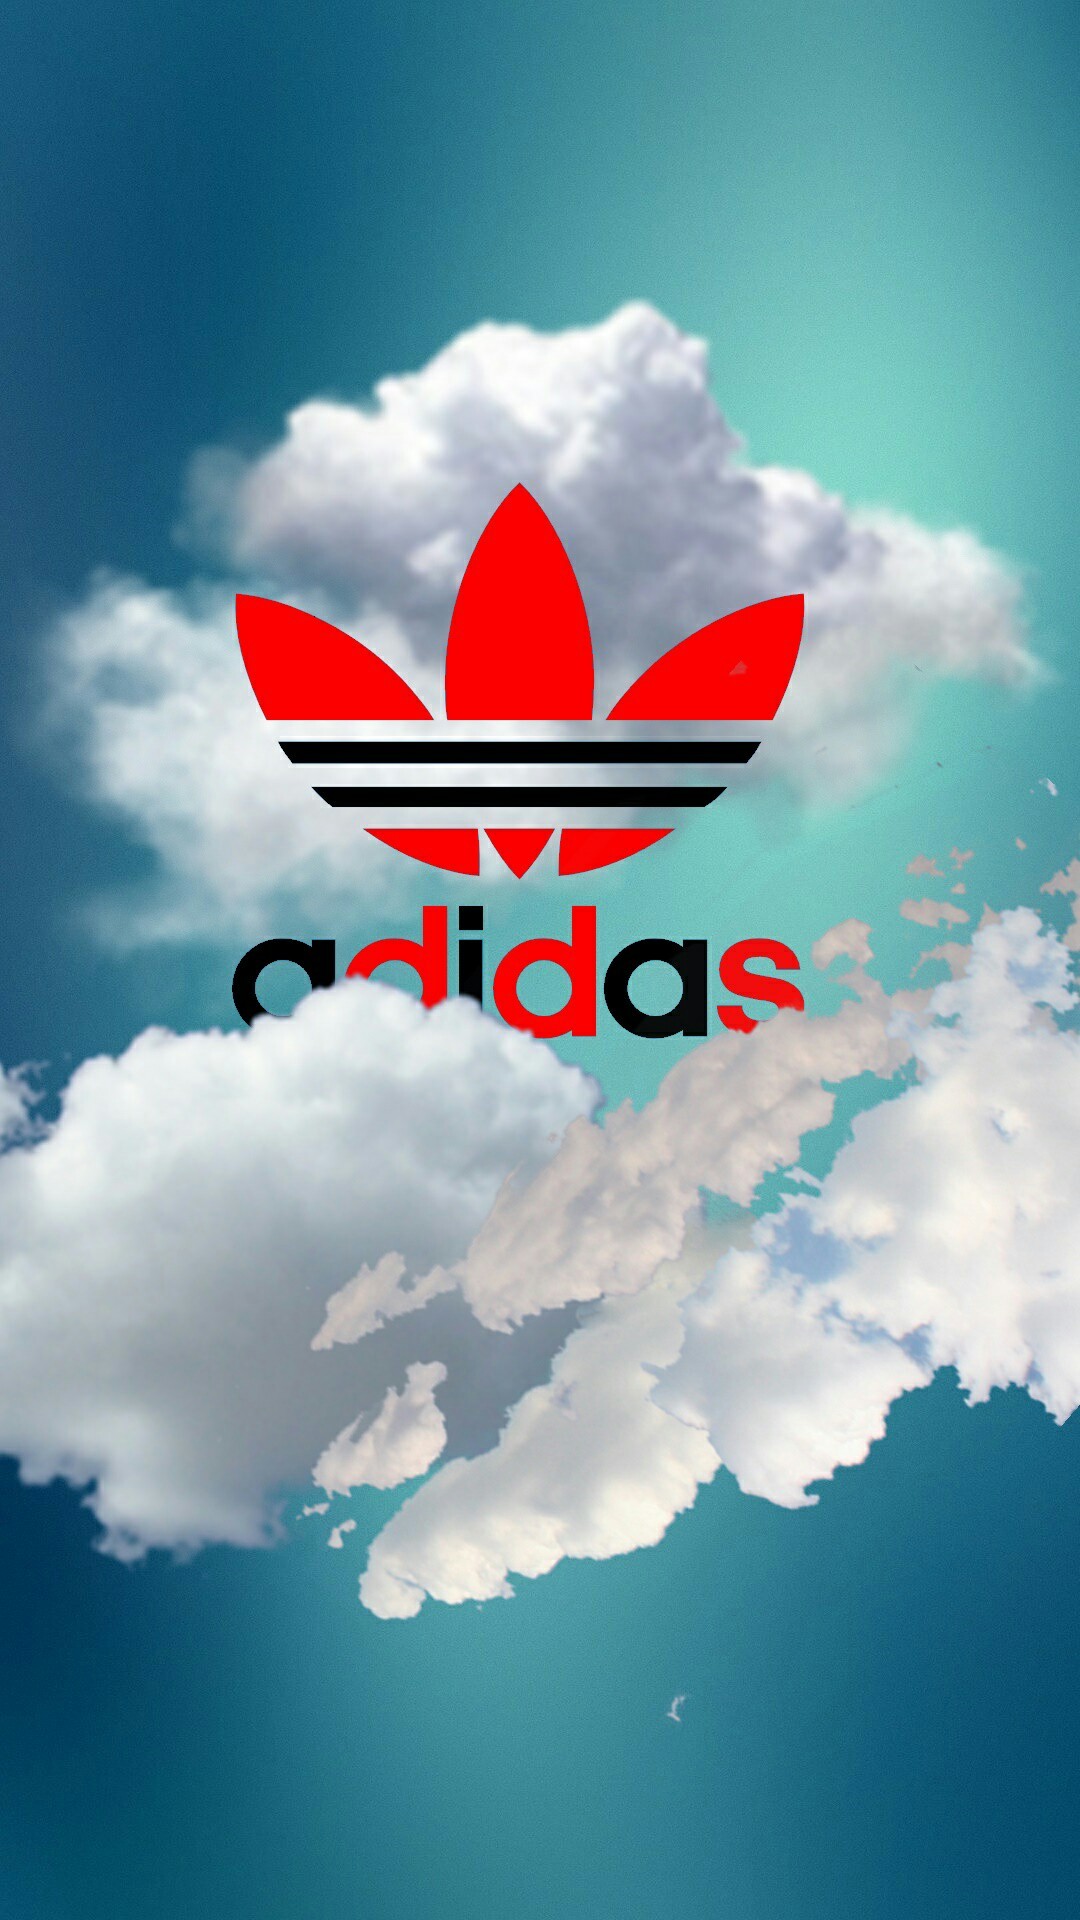 adidas hd wallpaper for iphone x